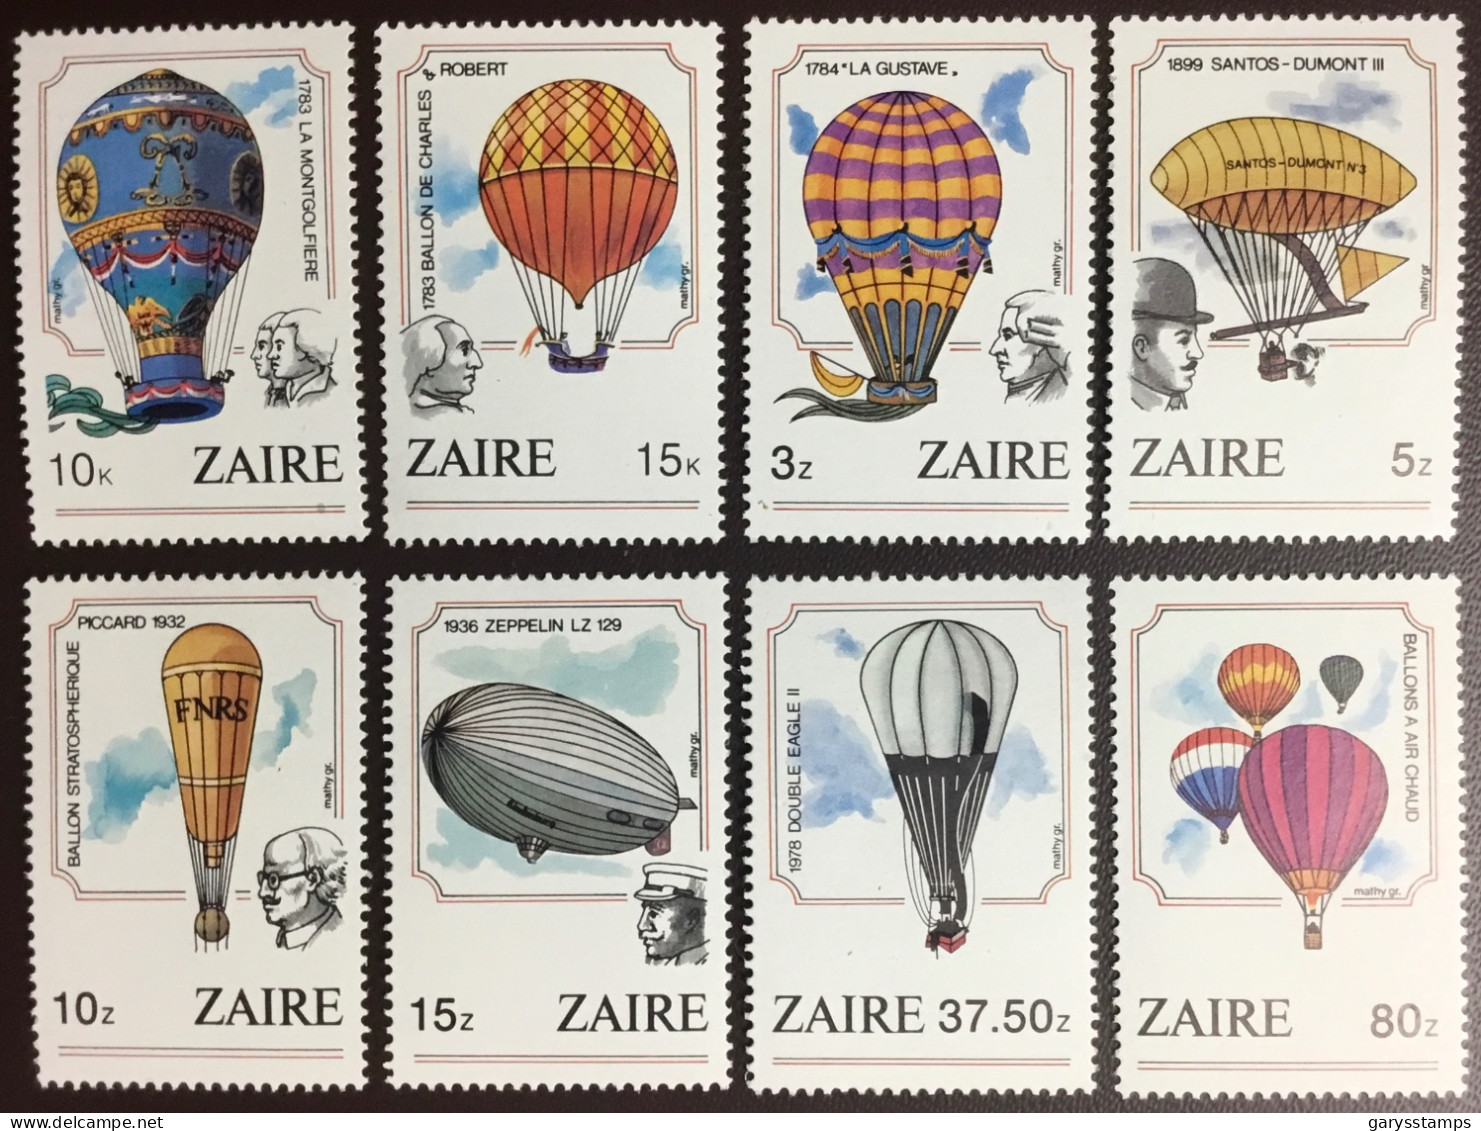 Zaire 1984 Manned Flight Anniversary Balloons MNH - Unused Stamps